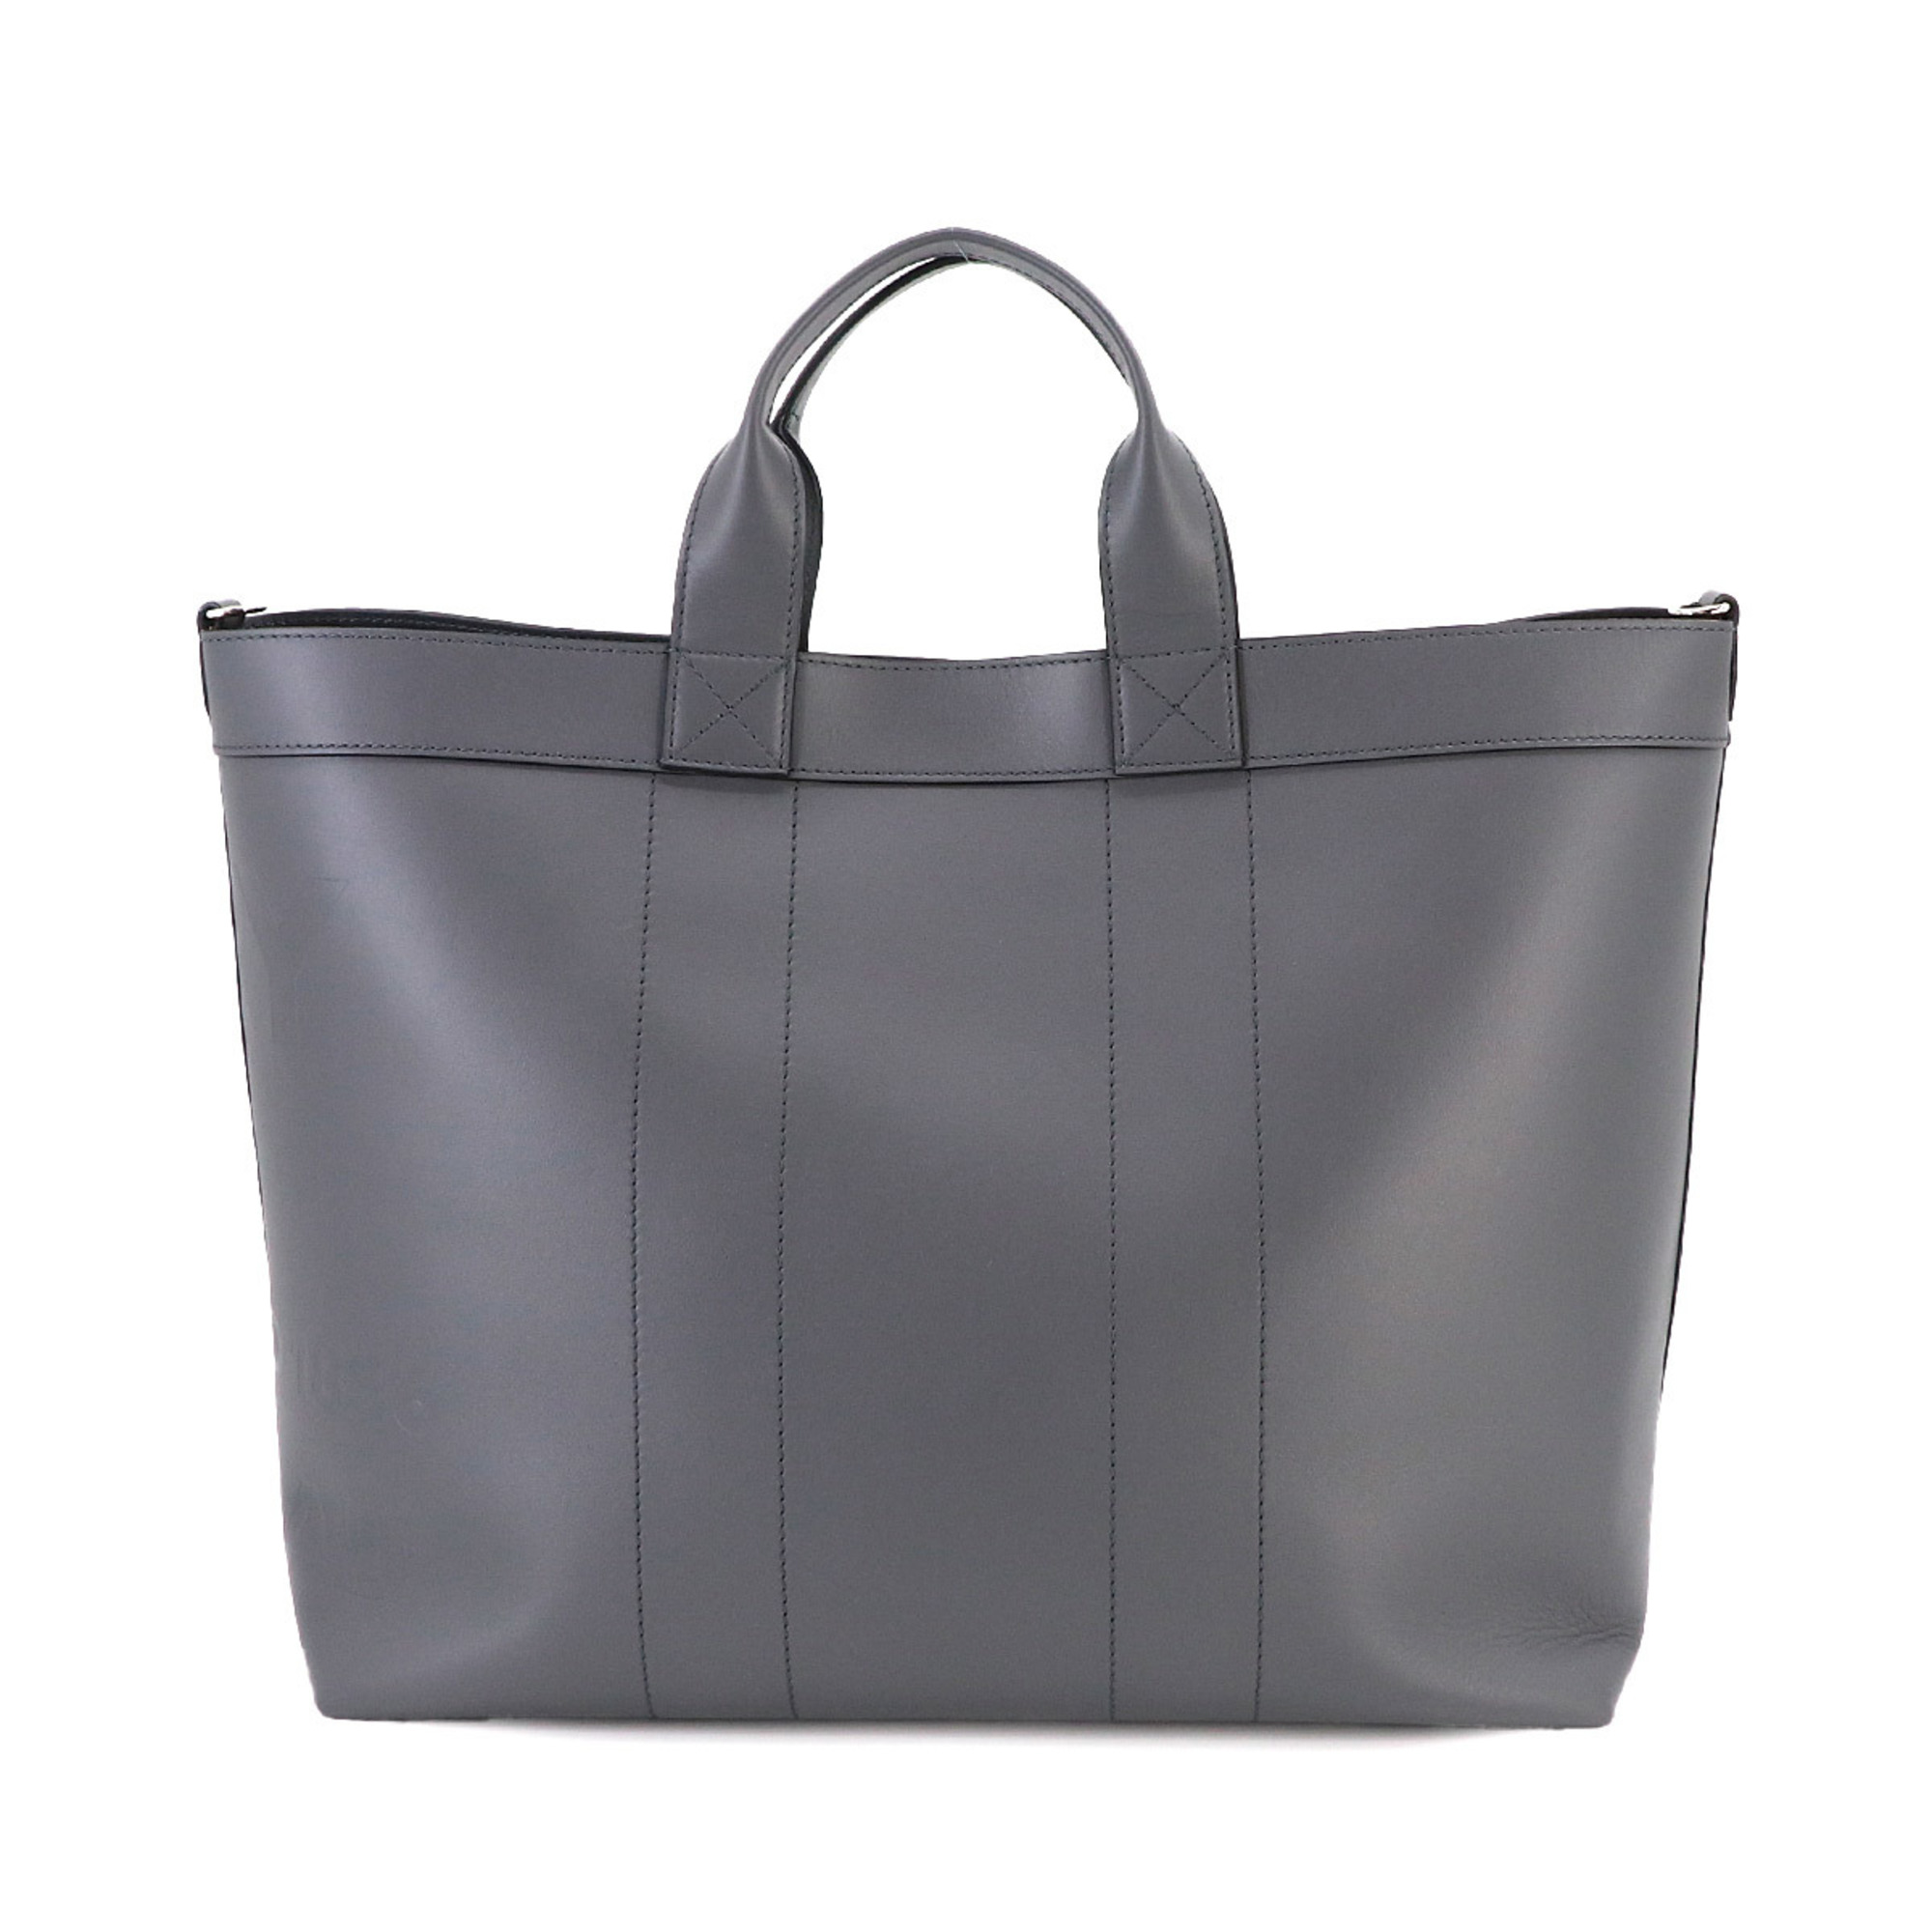 Burberry 2way Tote Shoulder Bag Leather Grey 8058237 Silver Hardware